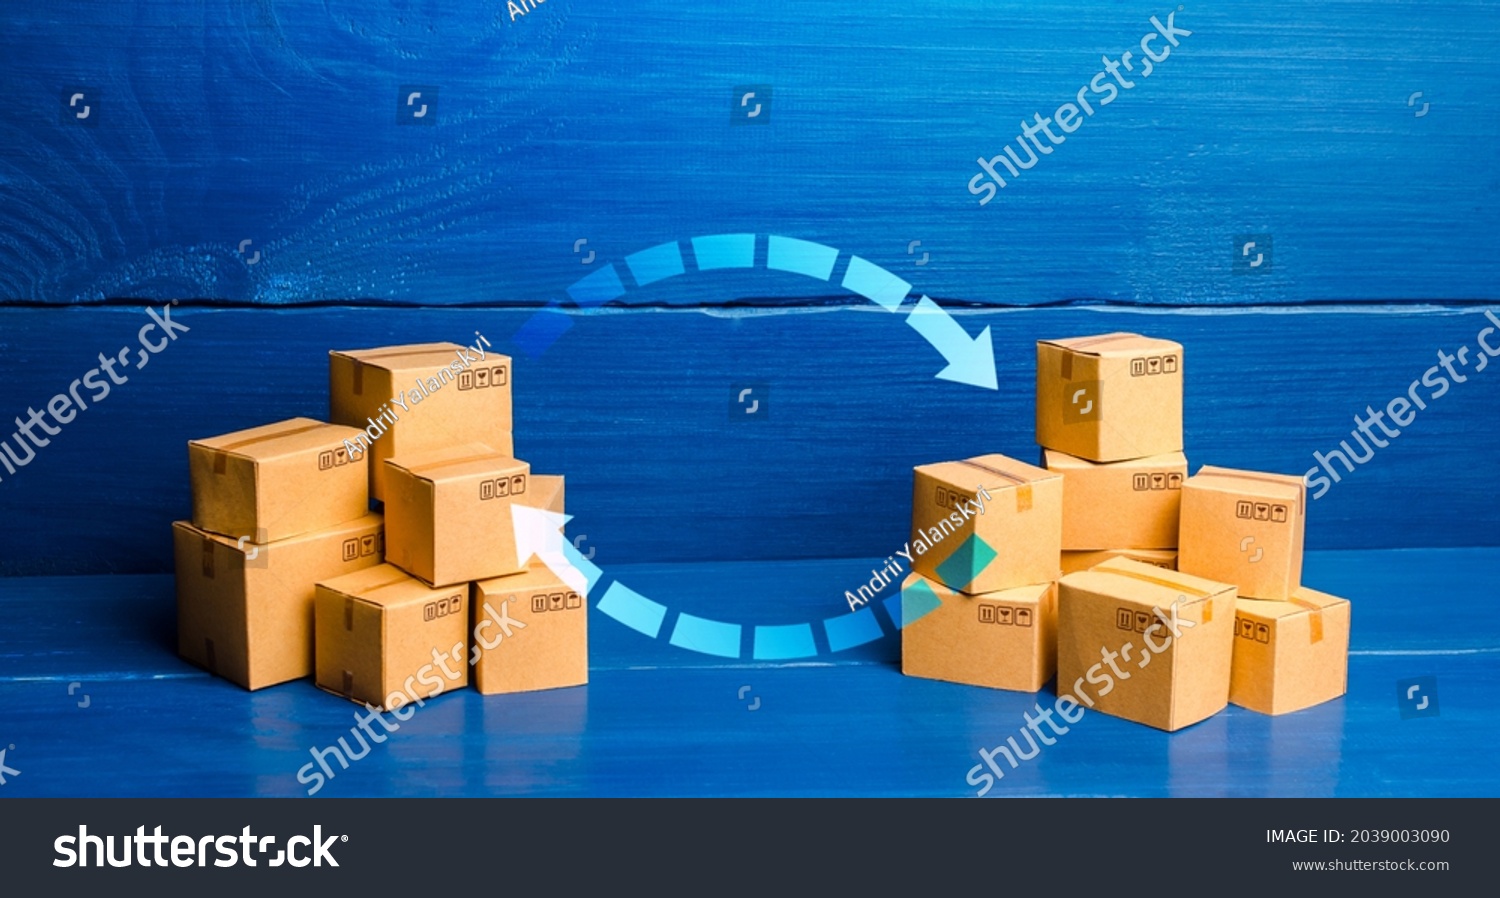 Arrows between boxes. Trade balance and exchange concept. Economic activity. Trading traffic. Transportation and transfer. Buying, selling or bartering goods. Production, manufacture. Deal transaction #2039003090